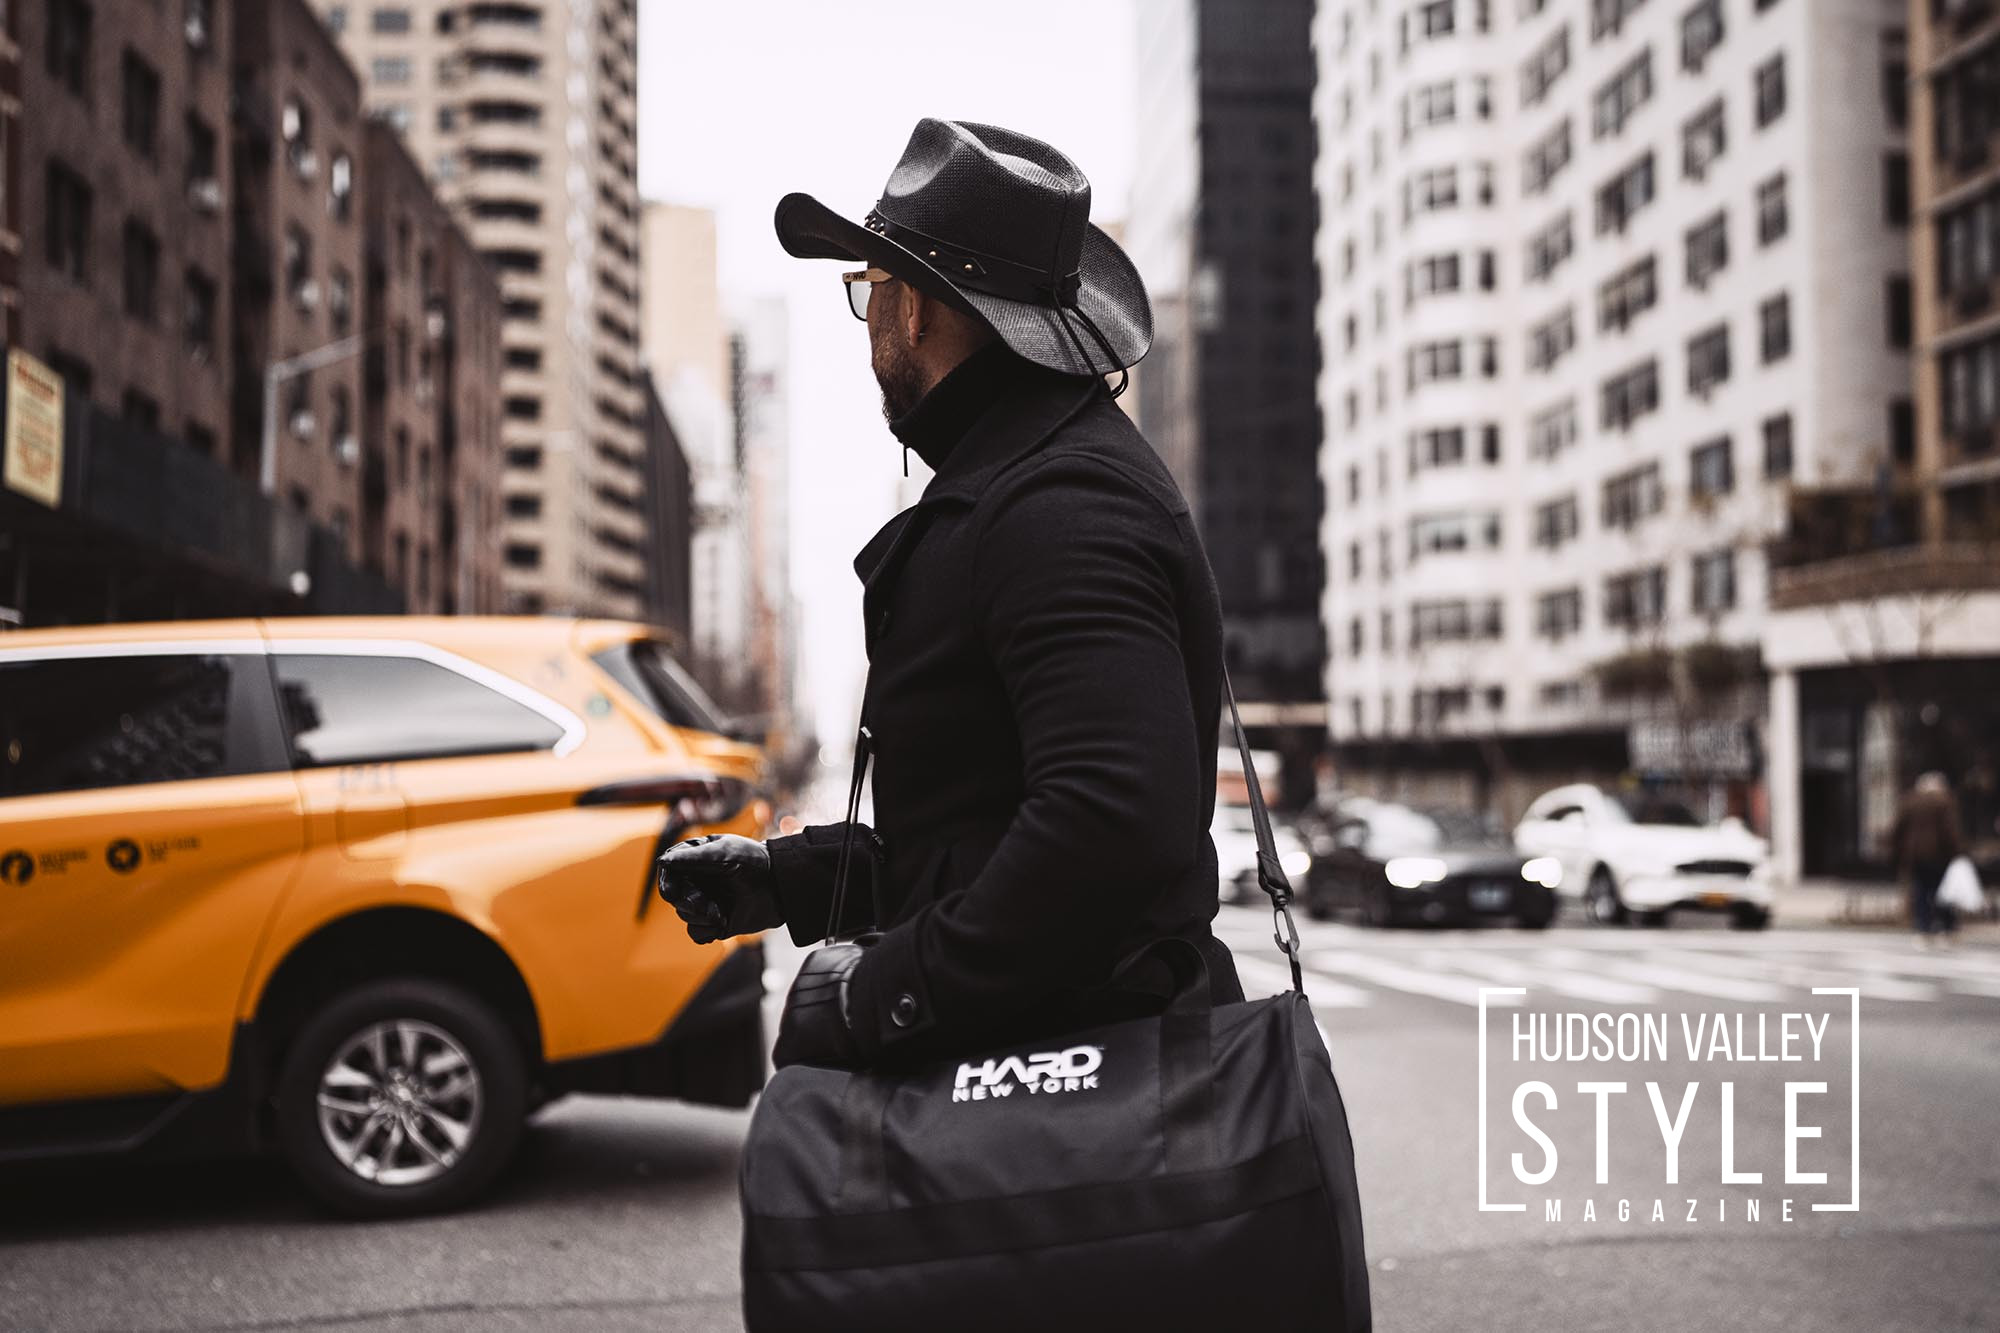 Saddle Up in Style: Mastering the Urban Cowboy Look with Men's Fashion Tips from Maxwell Alexander – Presented by HARD NEW YORK – Fashion Accessories and Apparel for Men